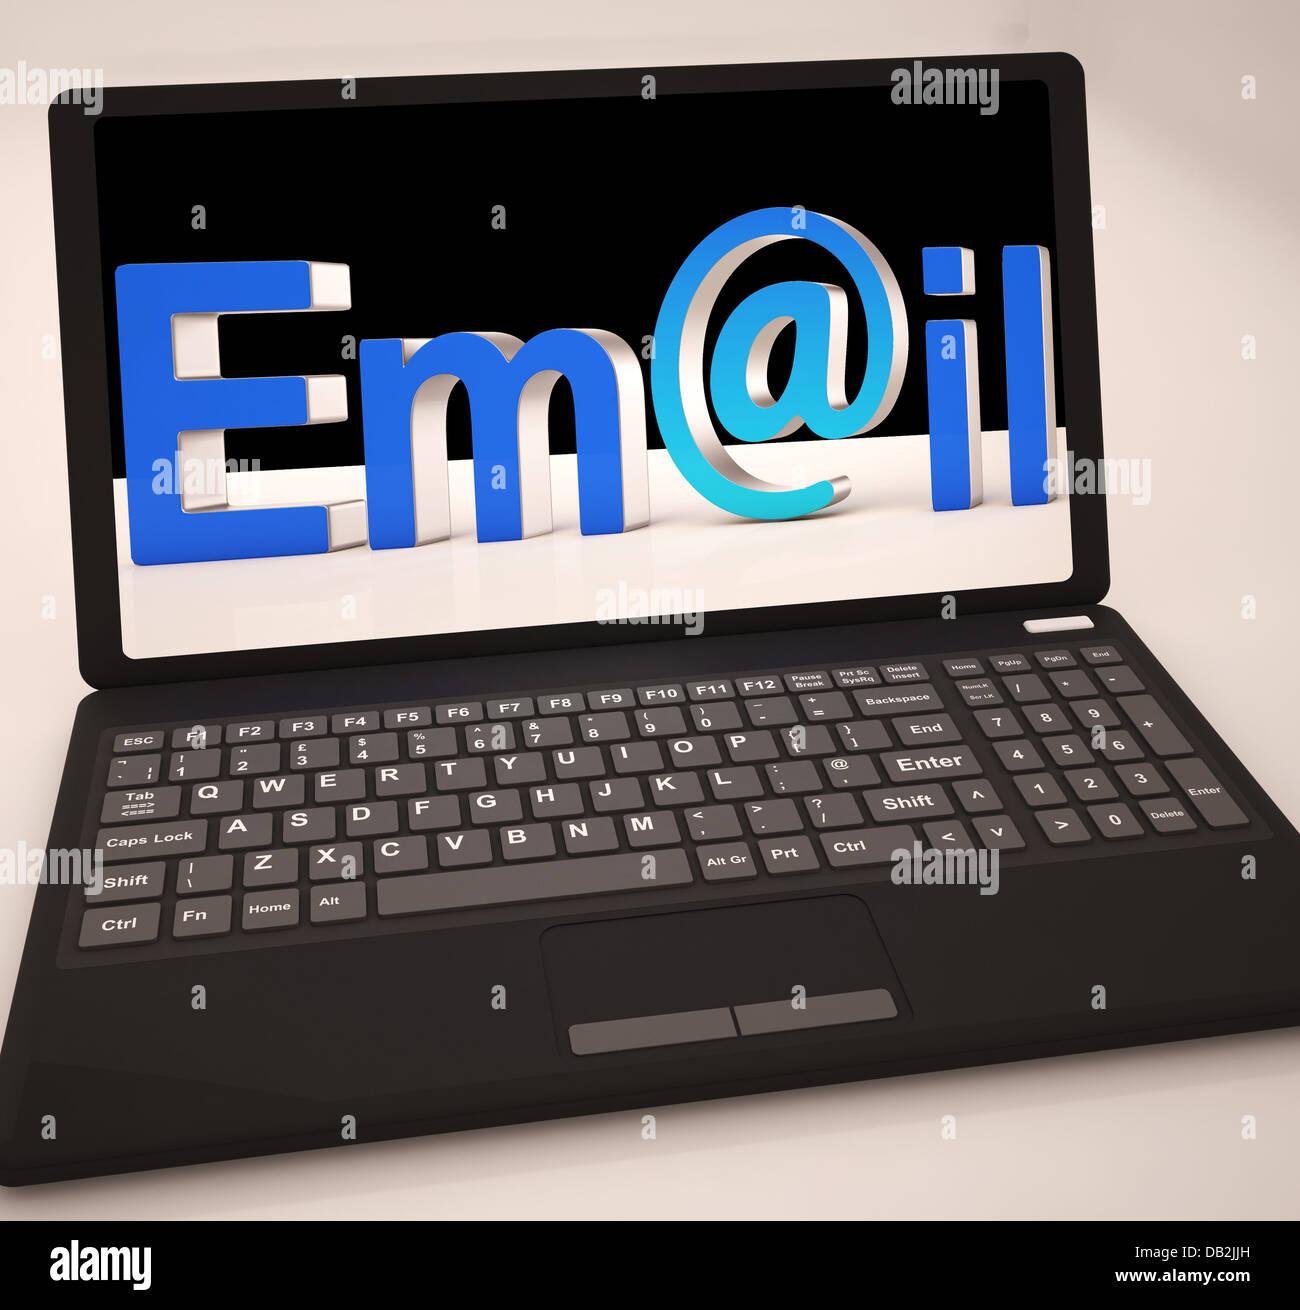 Email At Laptop Showing Inbox Stock Photo